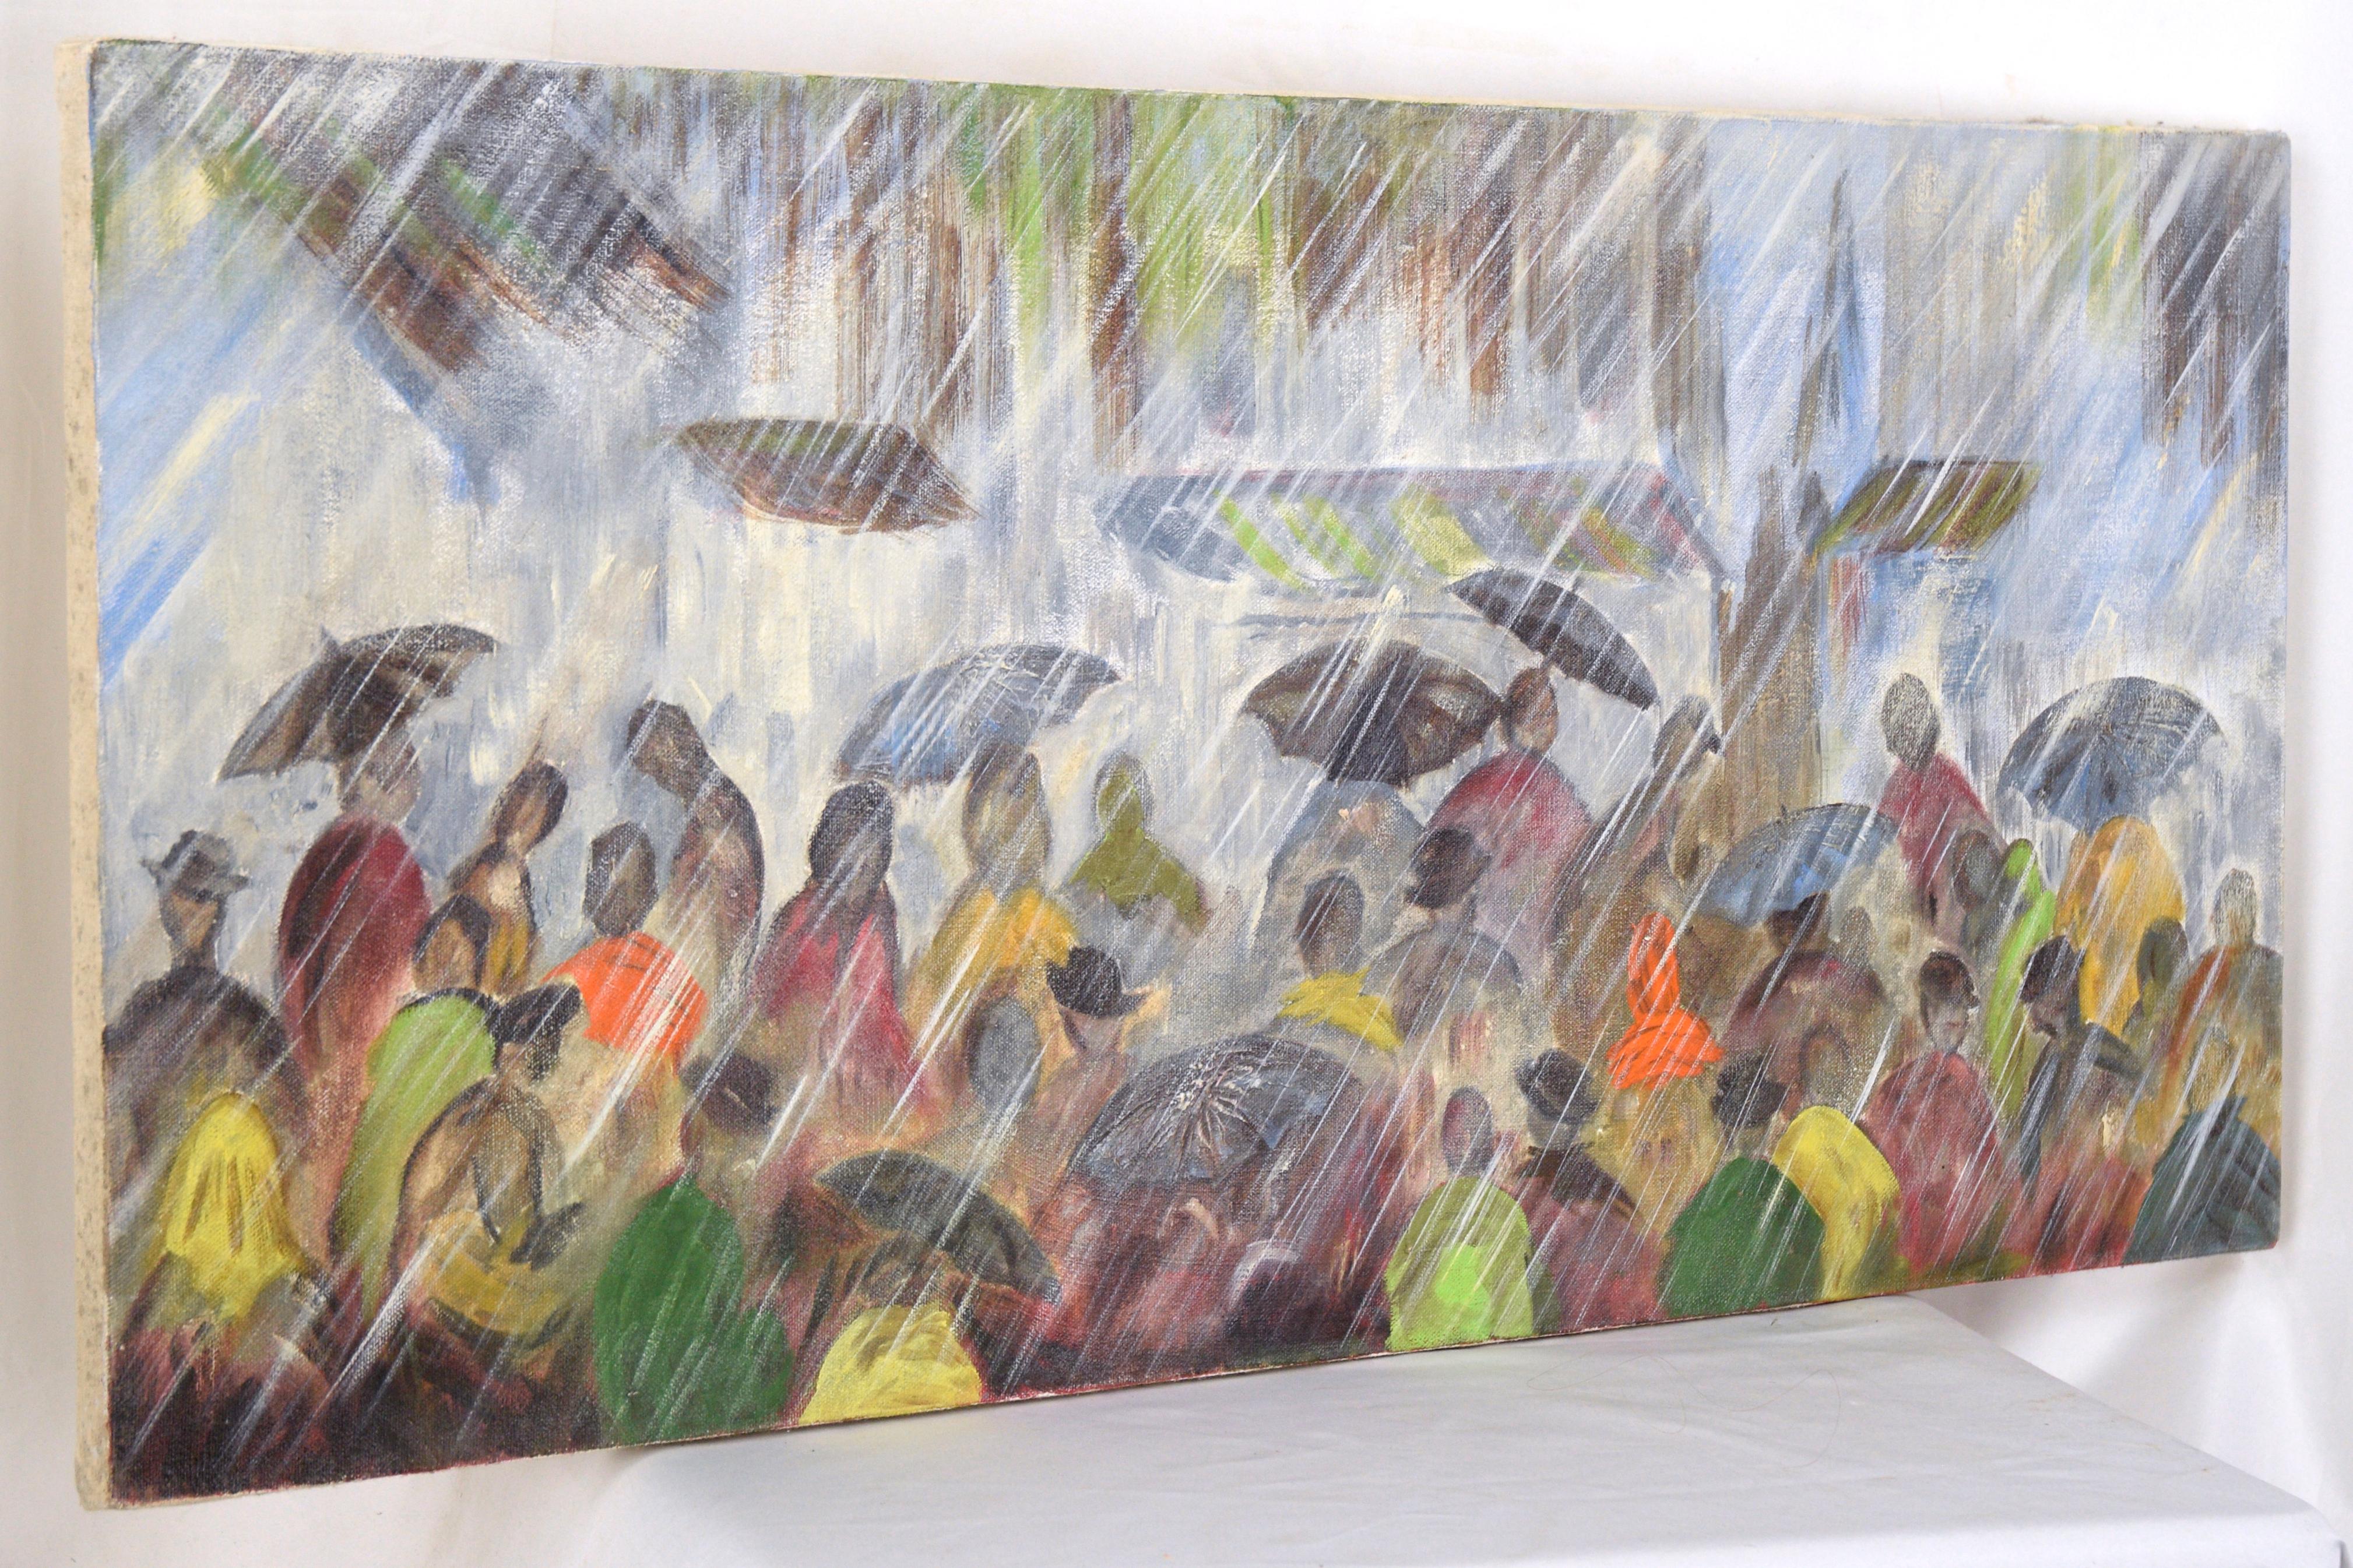 Pouring Down in the Streets - Paysage urbain pluvieux - Painting de Unknown